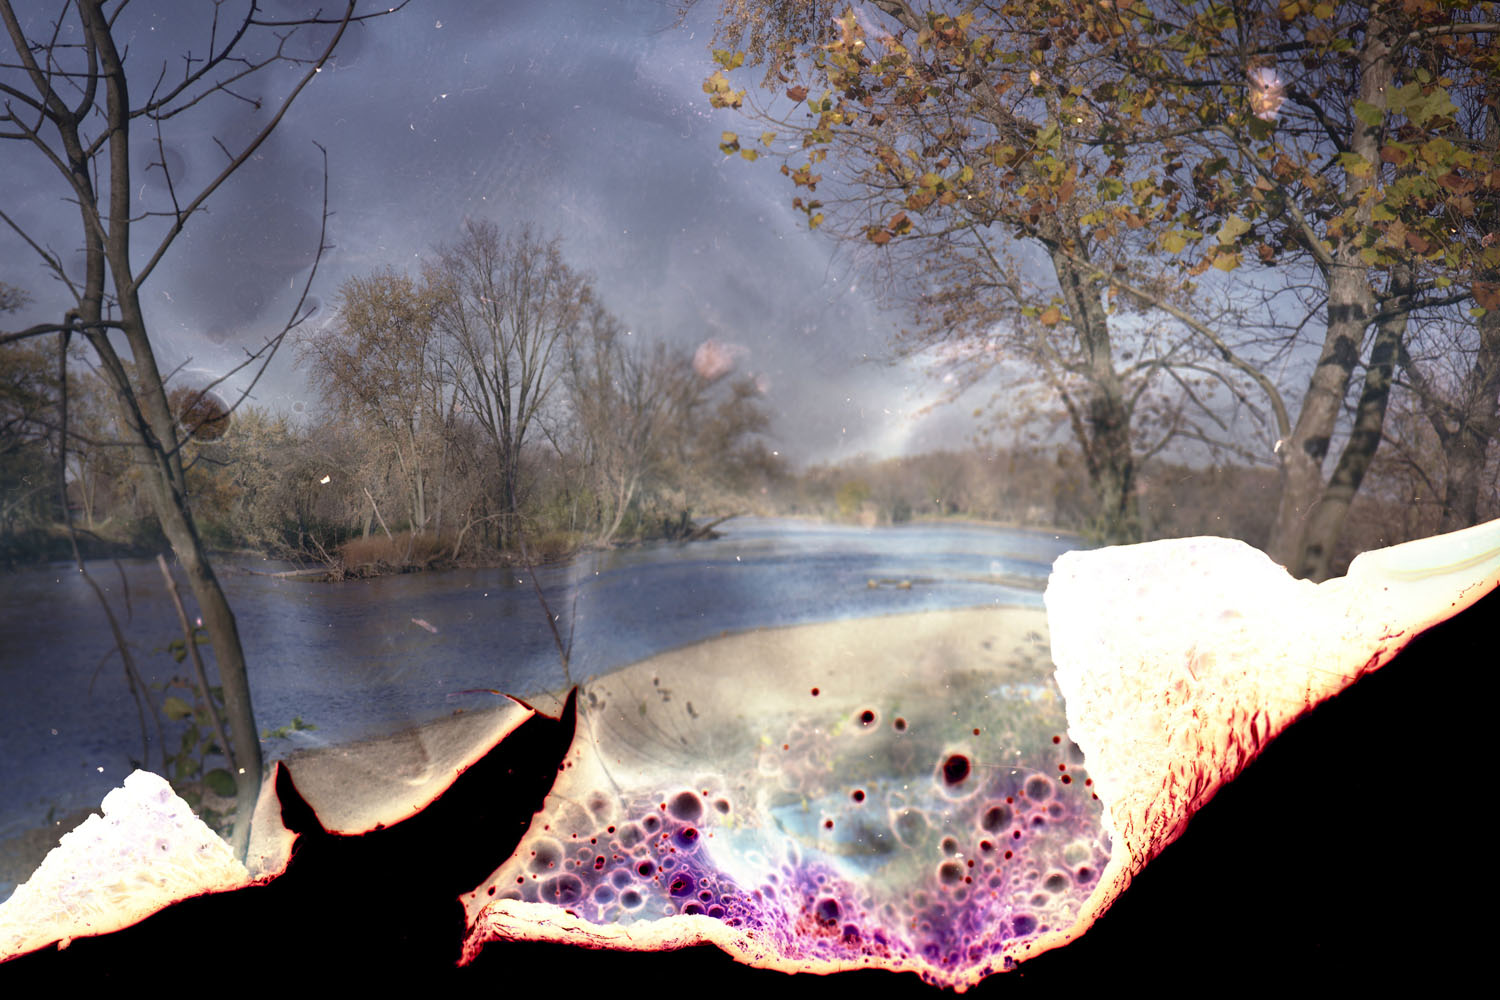 Untitled #3,  2010; from the series Fox River Derivatives. For his series on the themes of  water and oil,  inspired in part by the BP oil spill in the Gulf of Mexico, the artist coated these negatives of the Fox River near Chicago in gasoline and set them aflame.